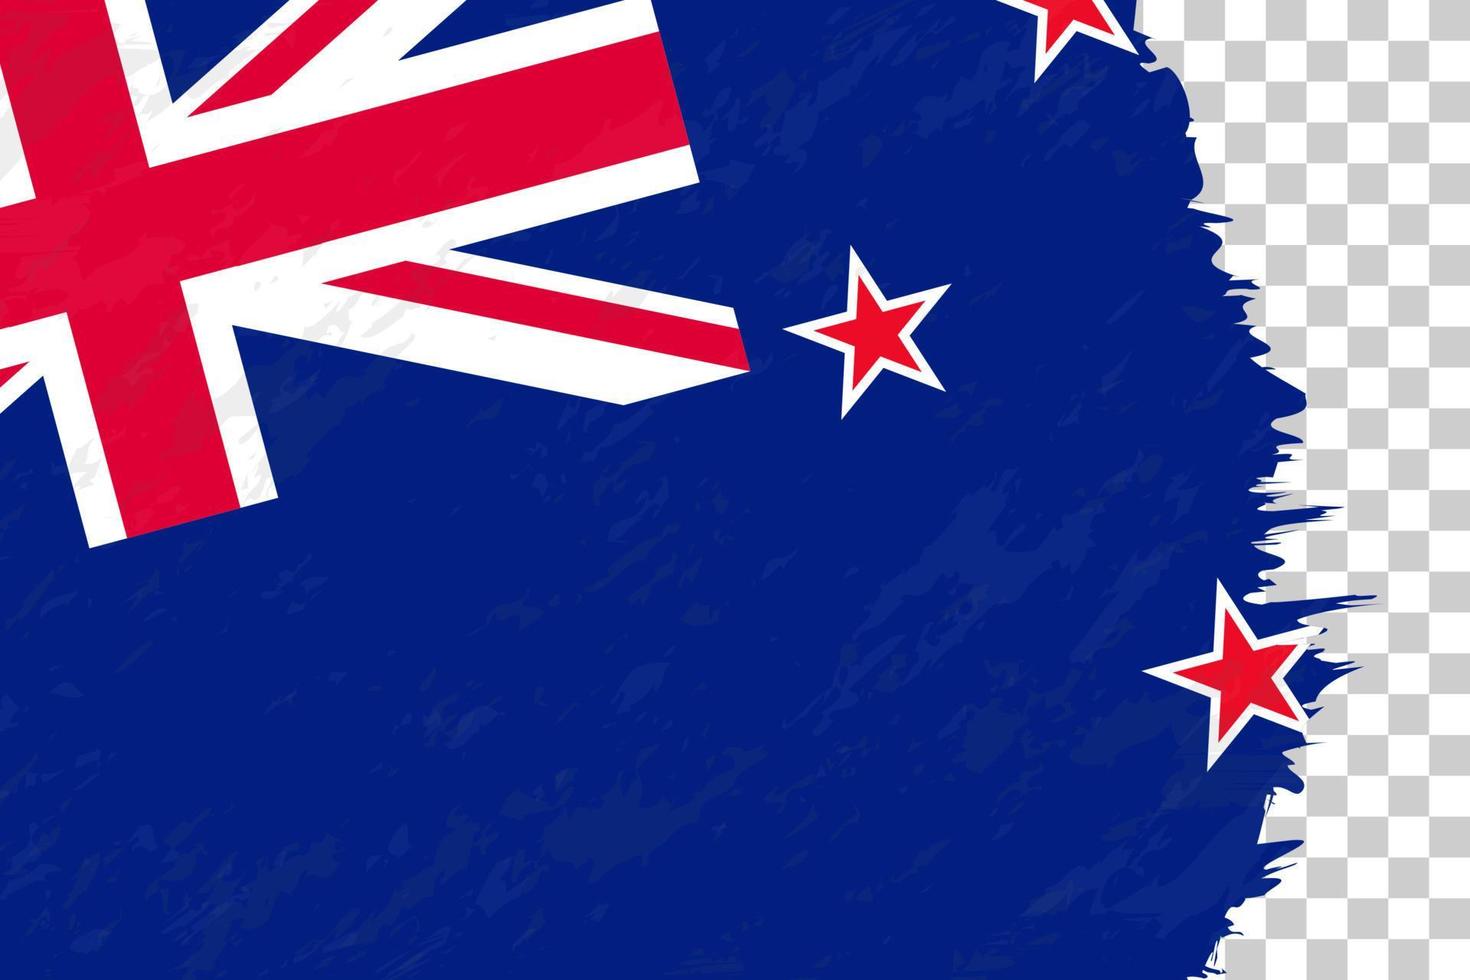 Horizontal Abstract Grunge Brushed Flag of New Zealand on Transparent Grid. vector